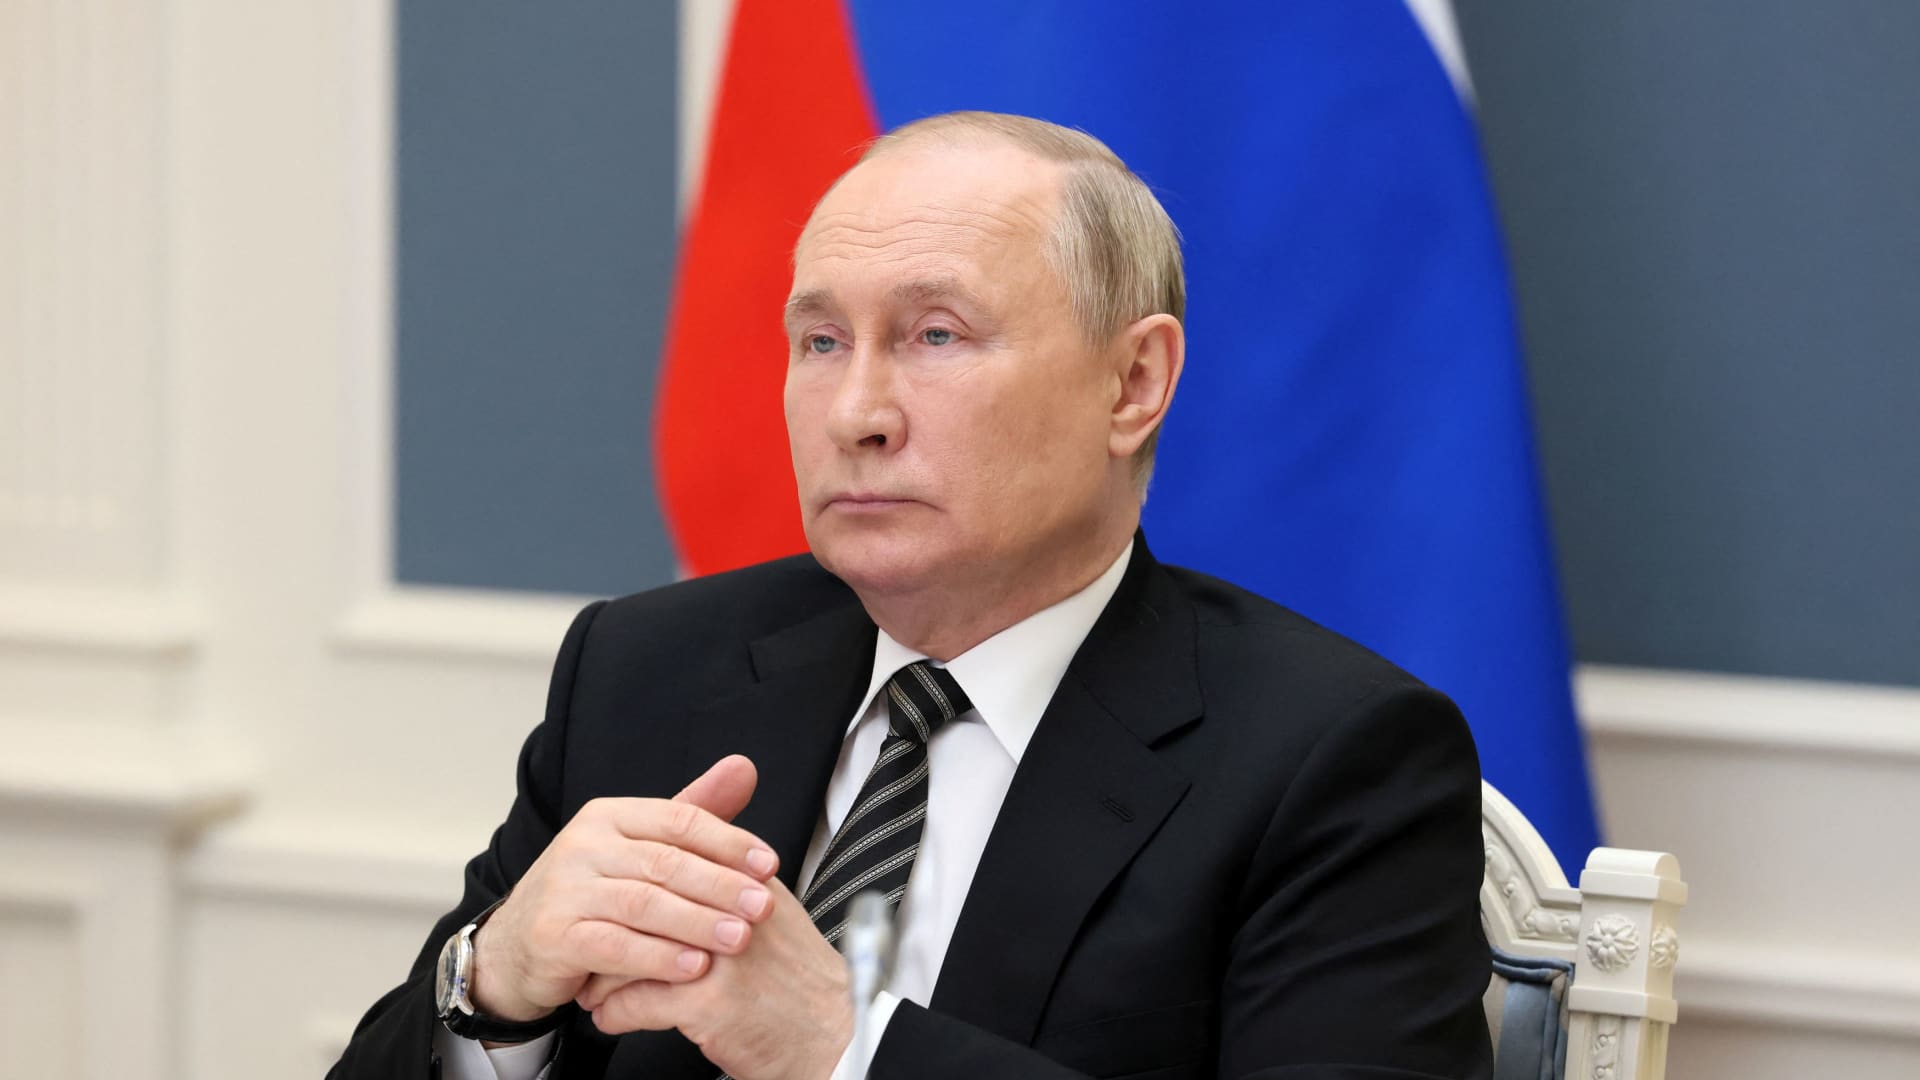 Russian President Vladimir Putin attends a meeting of the Supreme Eurasian Economic Council involving the Eurasian Economic Union's (EAEU) heads of states via a video link in Moscow, Russia May 27, 2022. 